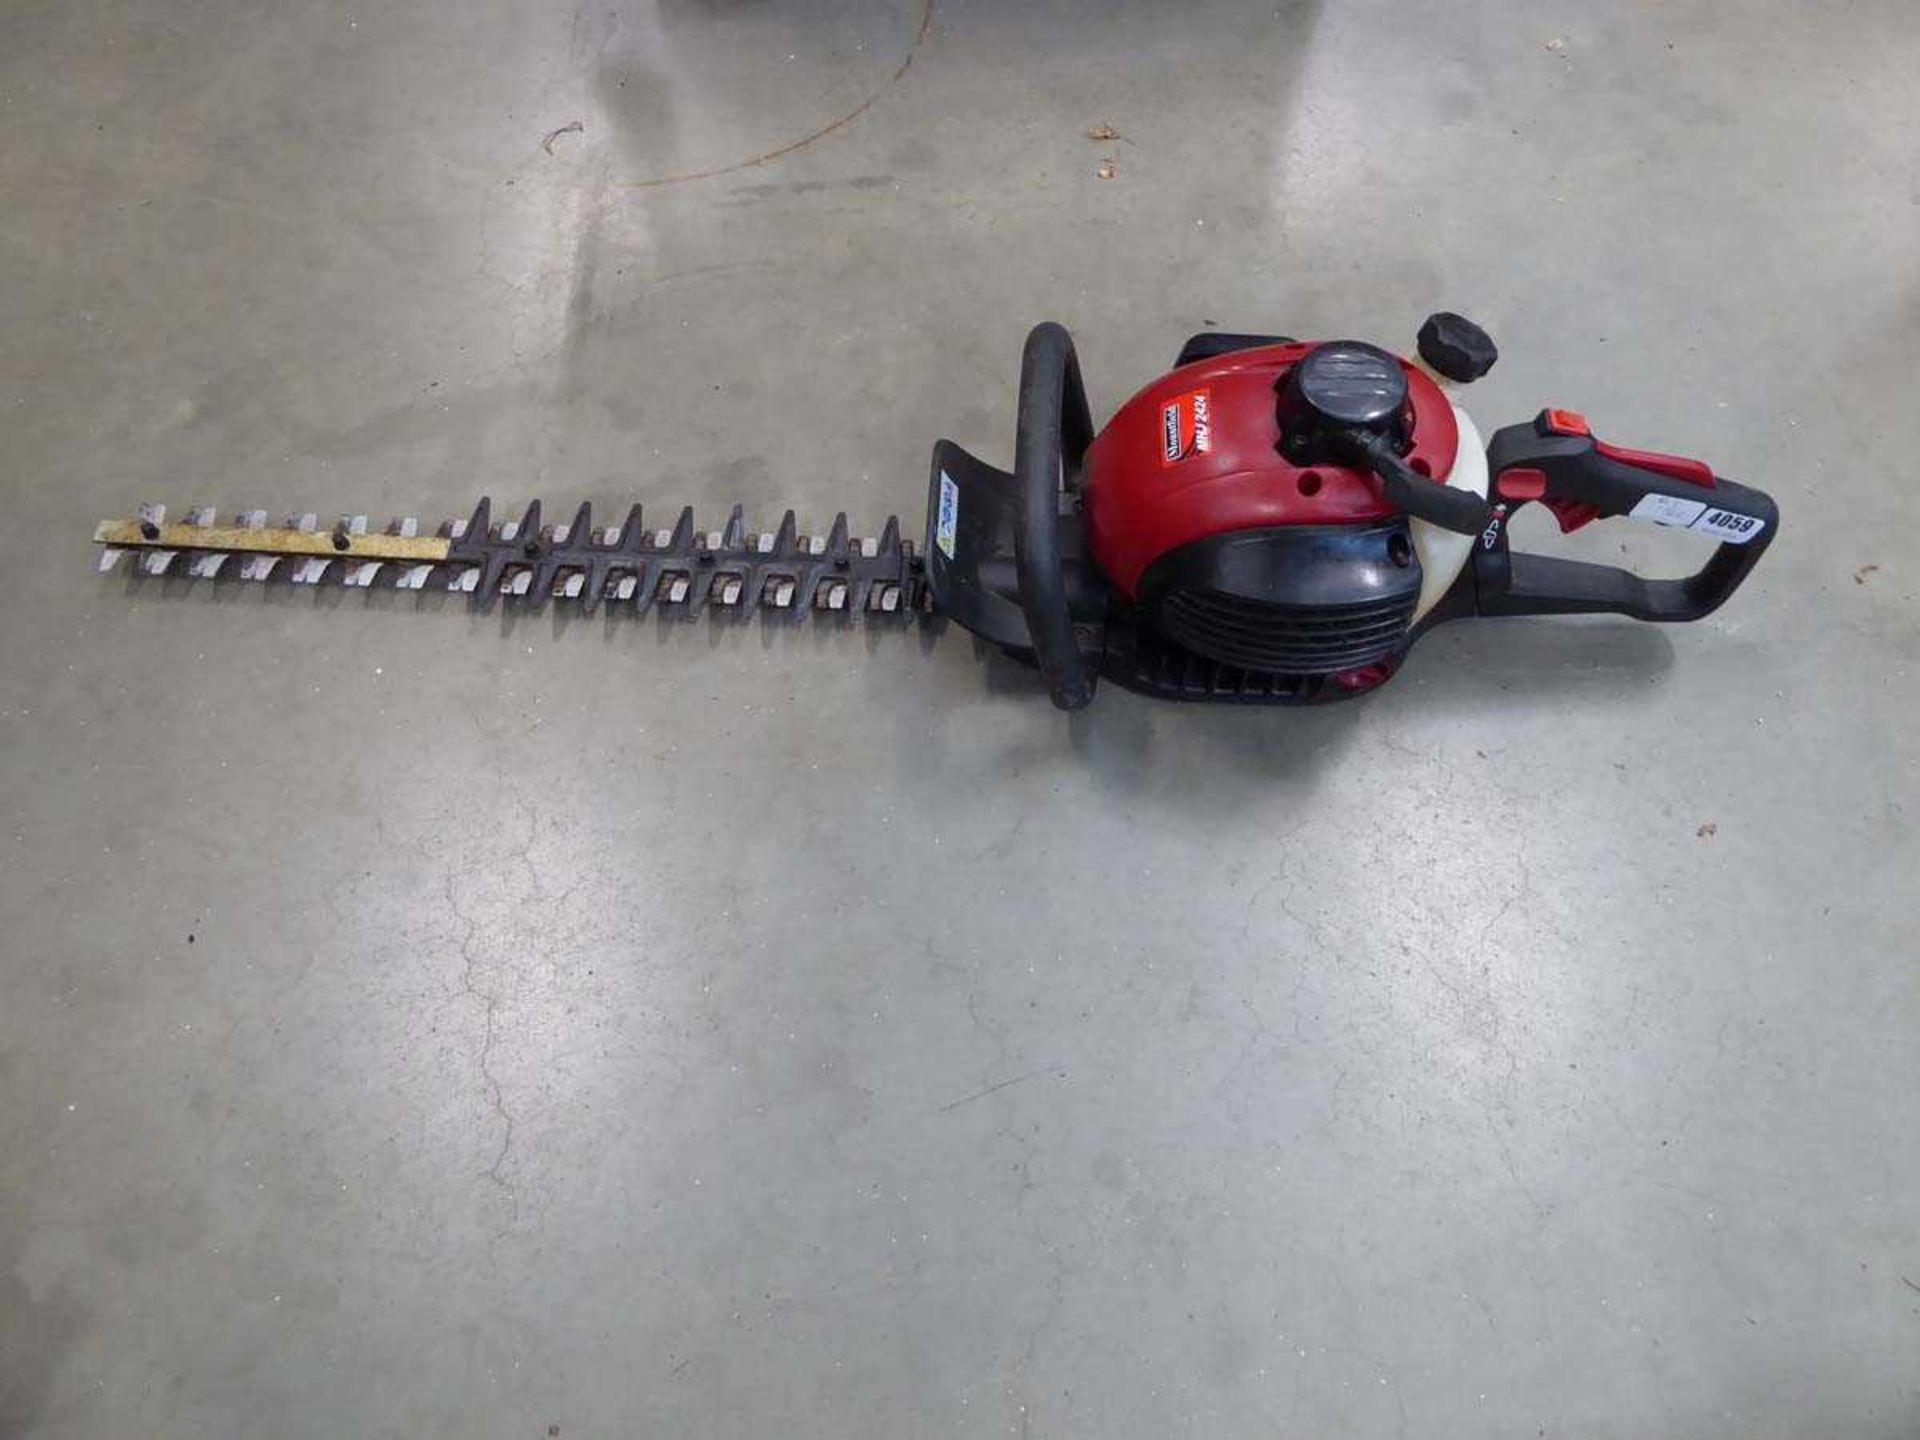 Mountfield red petrol powered hedge cutter